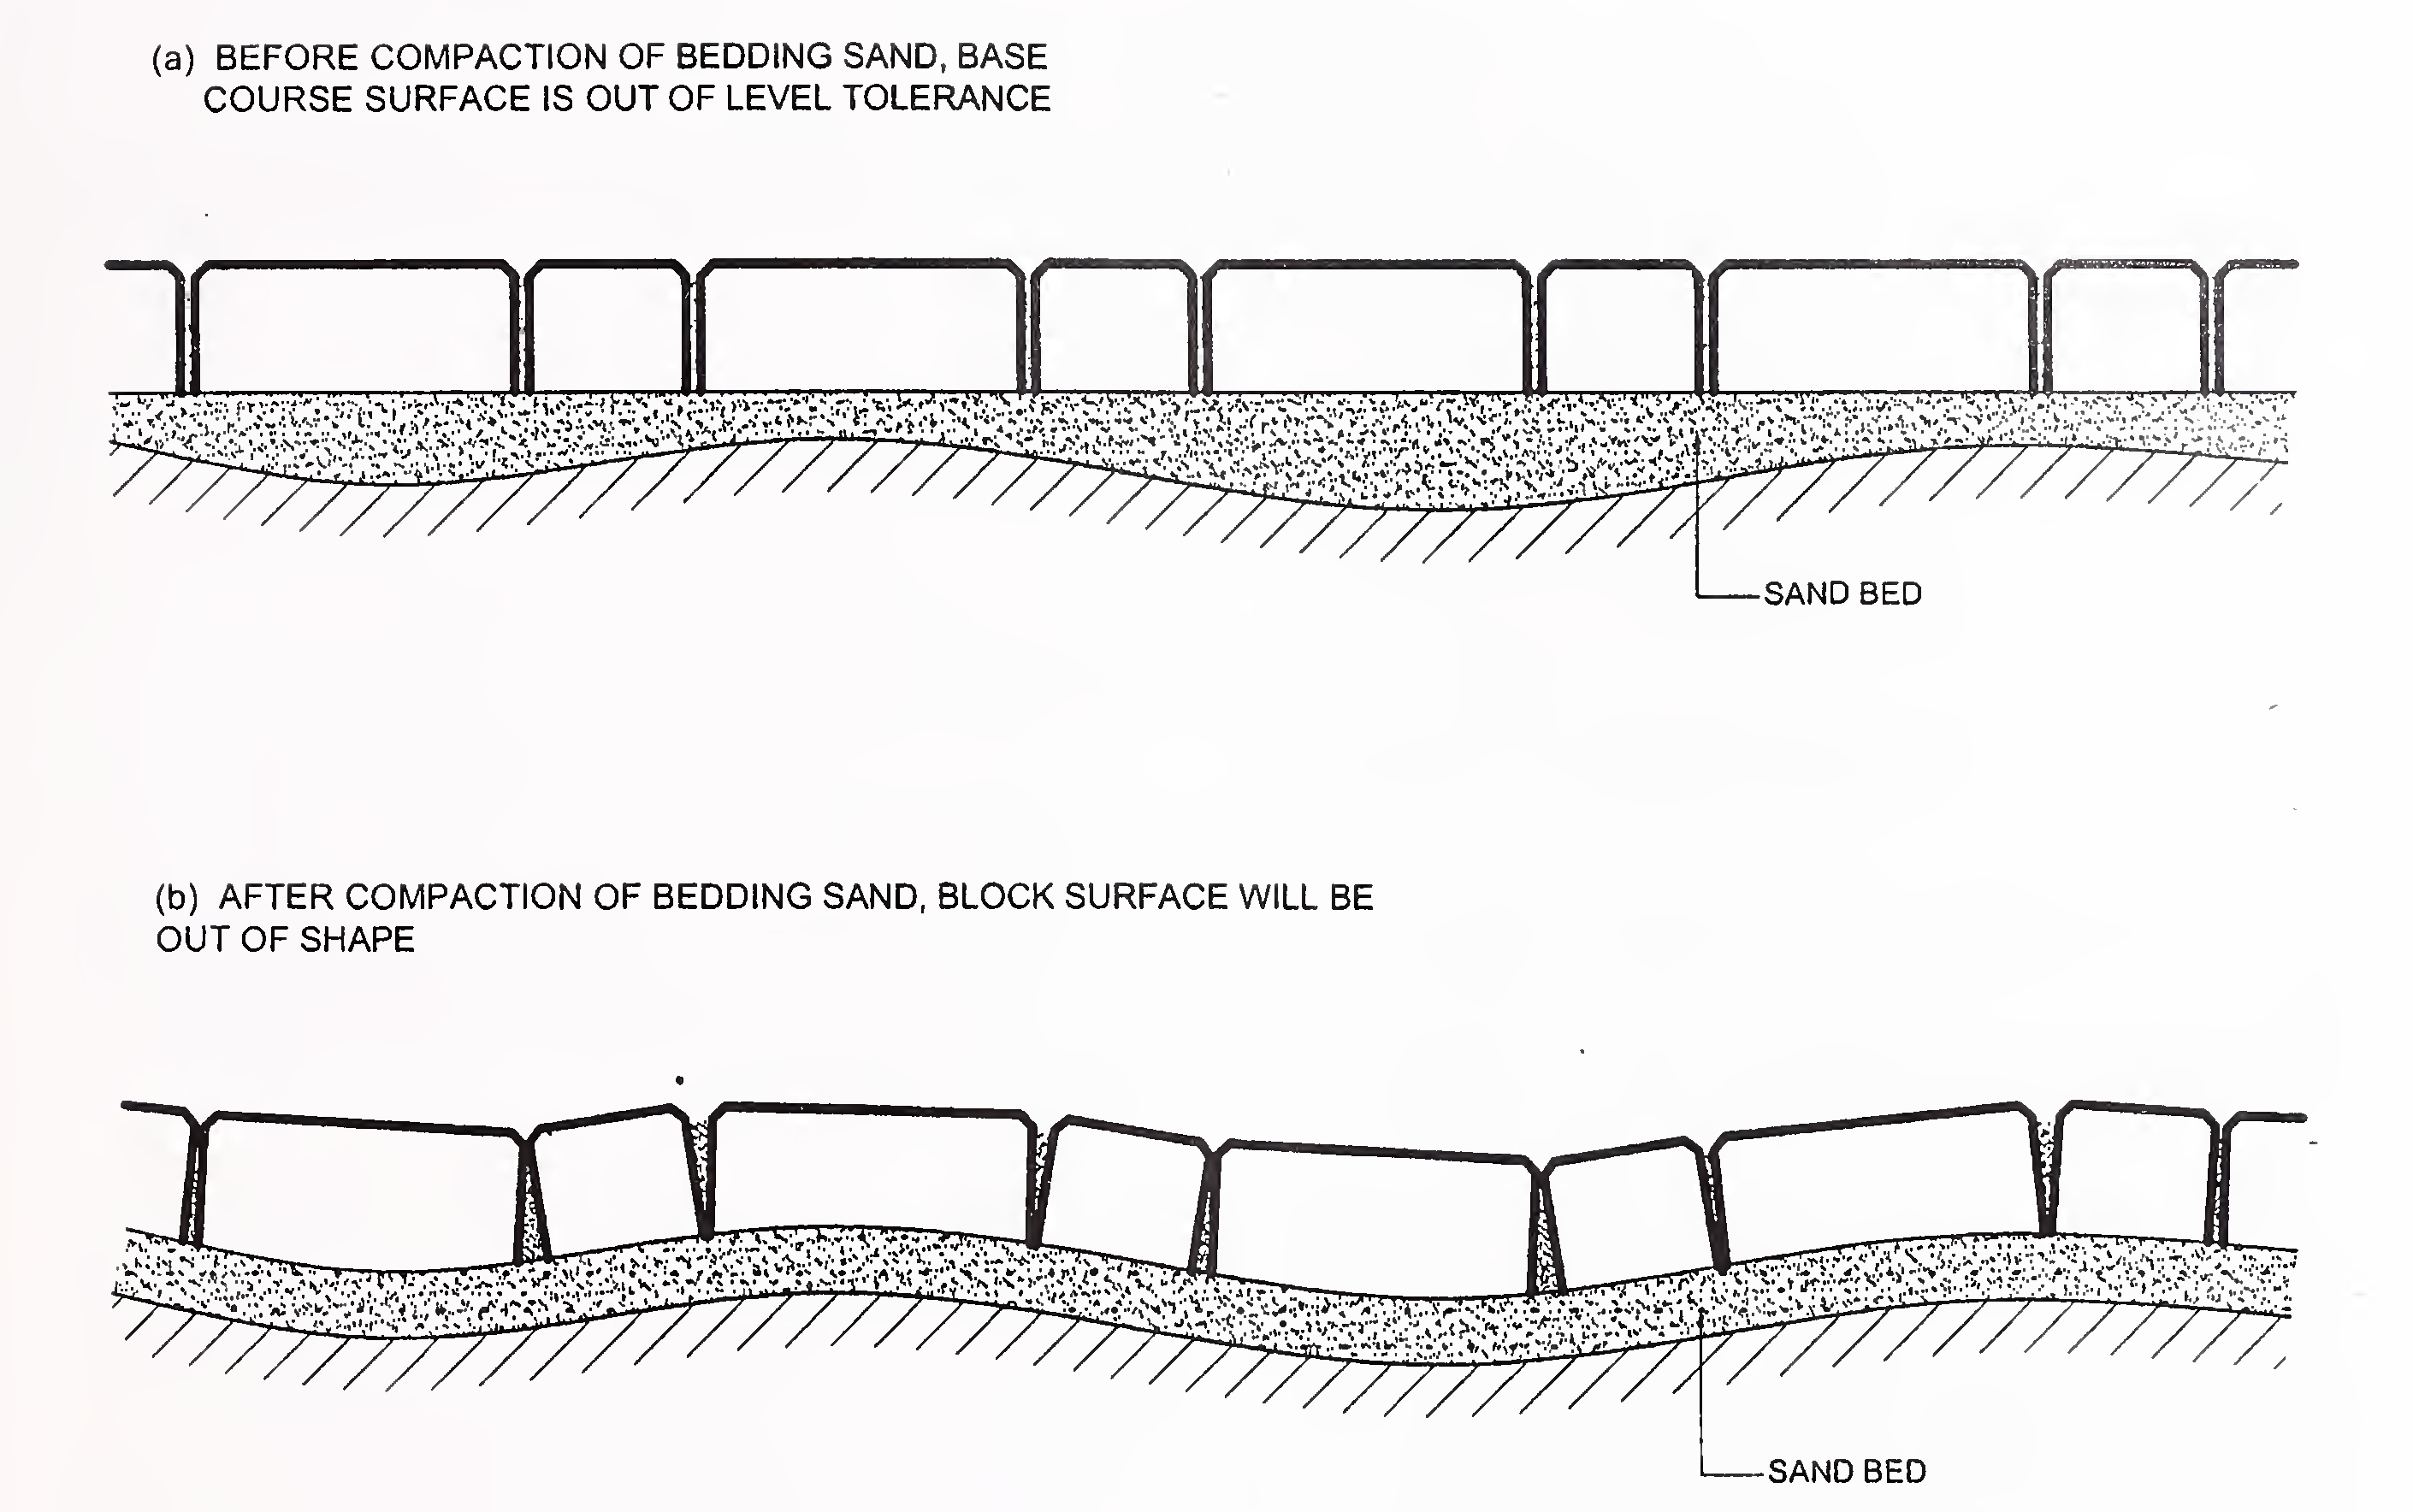 Fig. 12. Effect of base-course surface shape on bedding sand and block surface shape